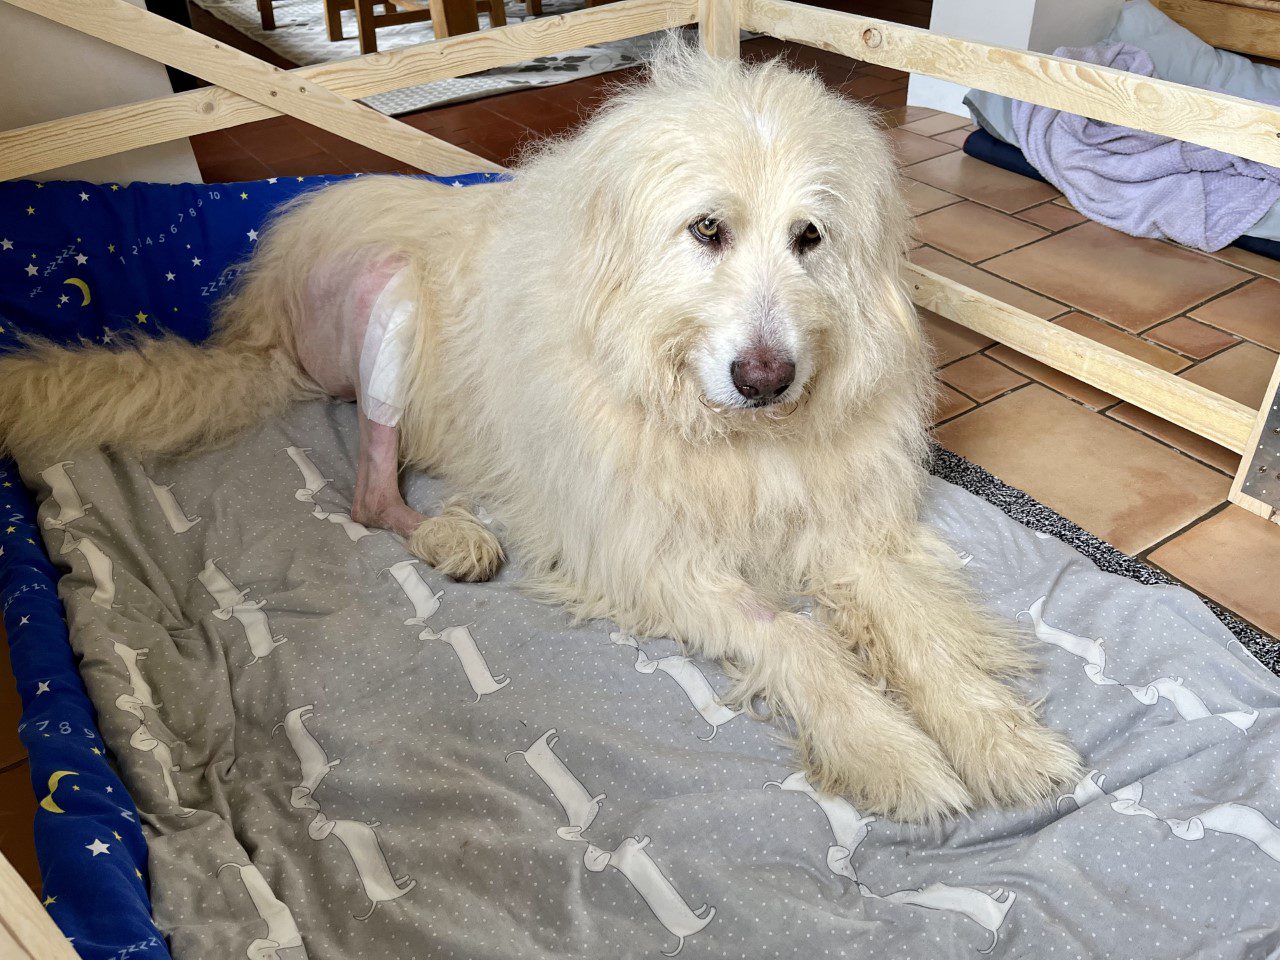 Baxter a Mioritic shepherd Romanian resuce dog TPLO surgery on hind leg | 1 Dog At A Time Rescue UK